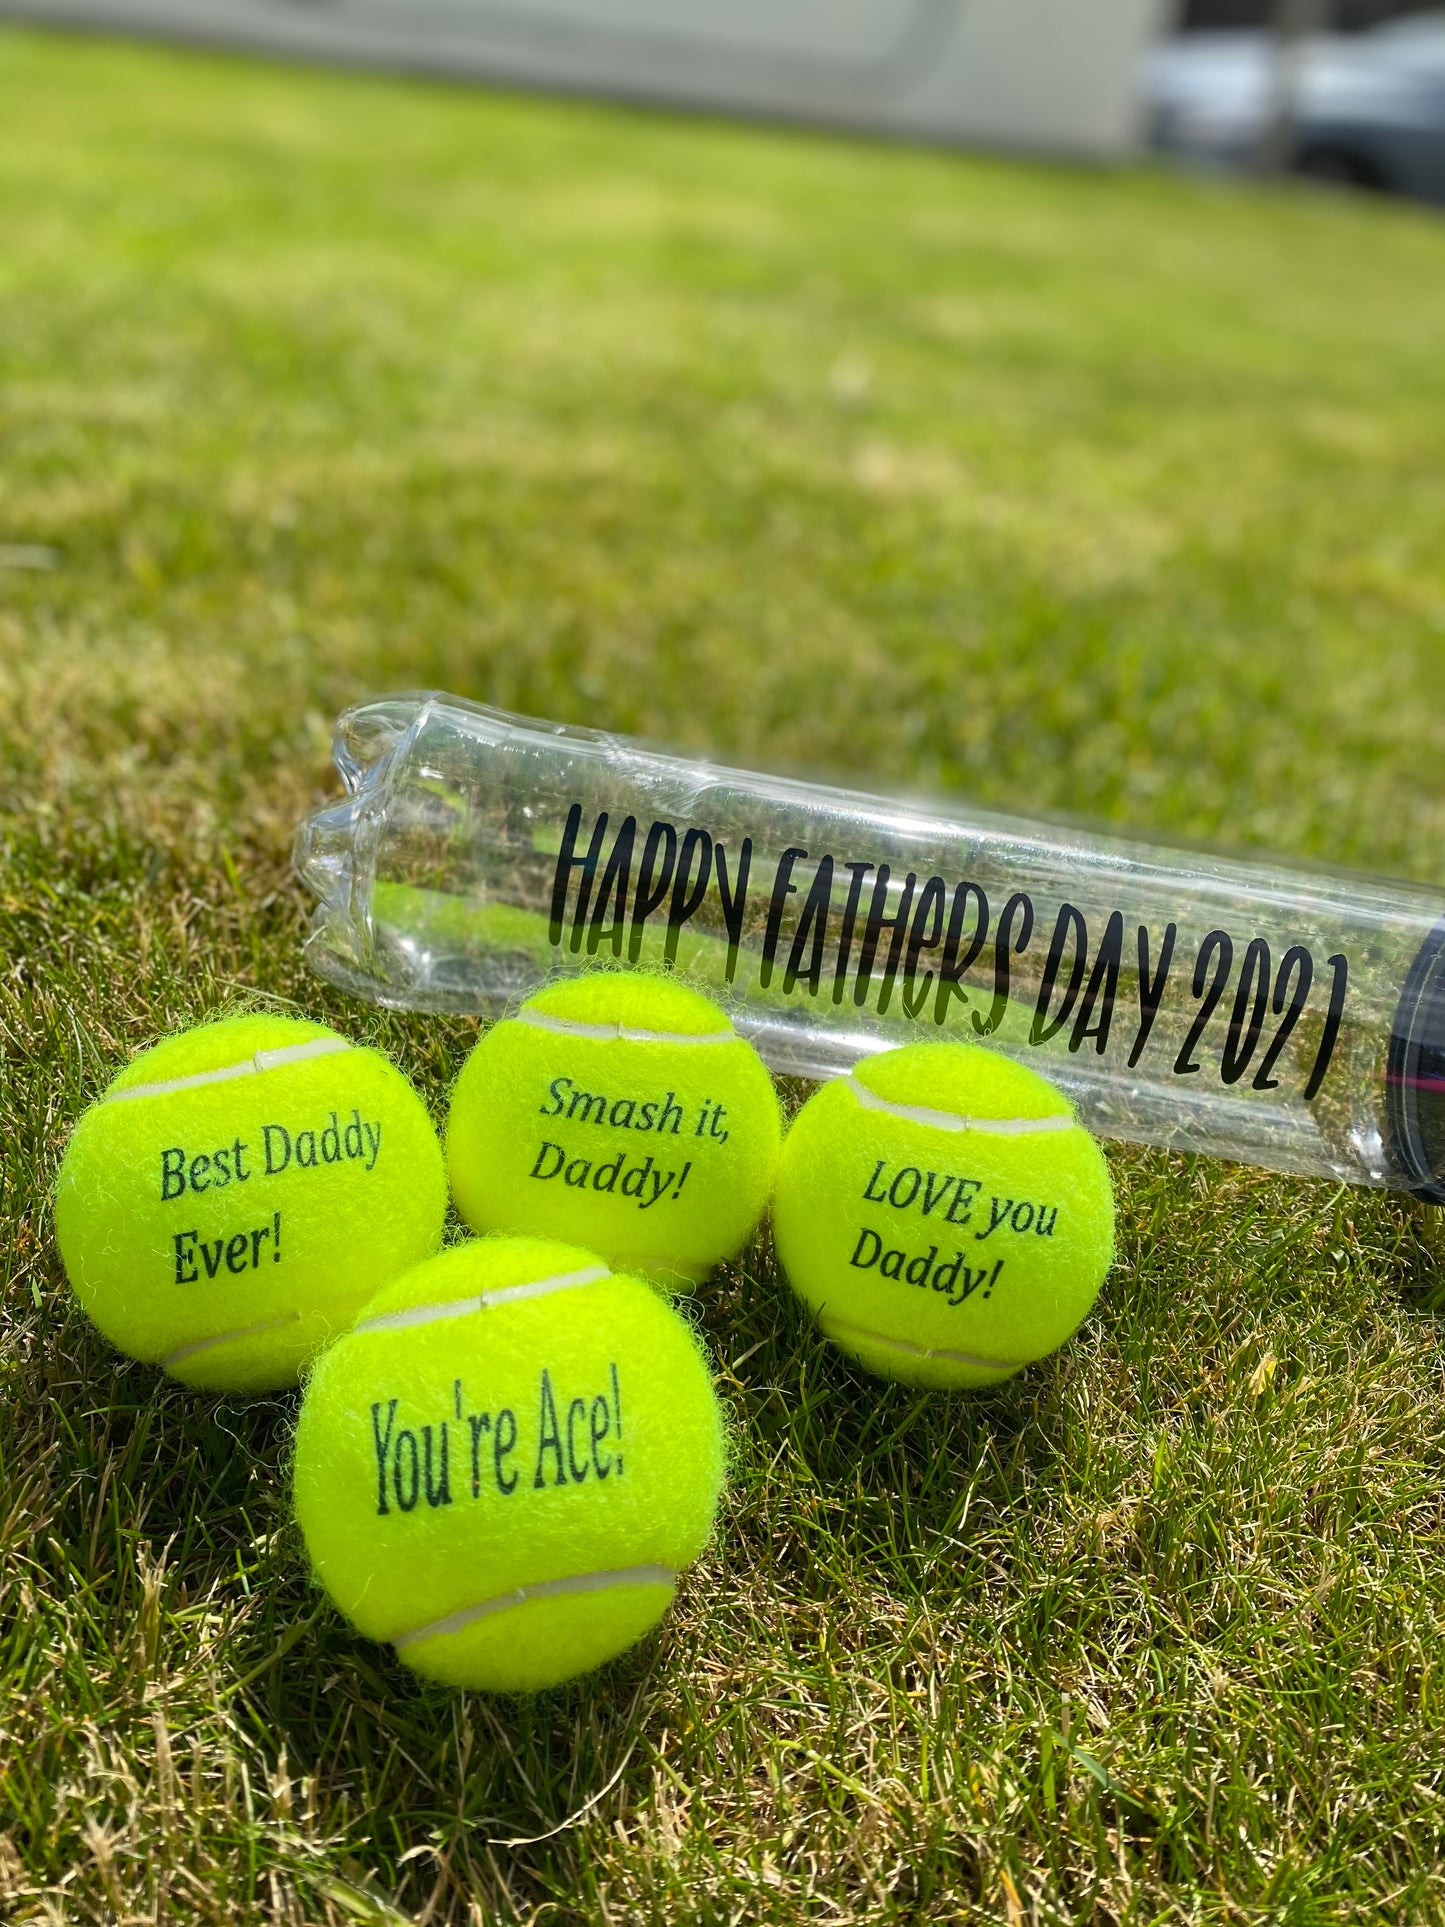 NTB Personalised Adult's Tennis Balls - Standard Text Edition